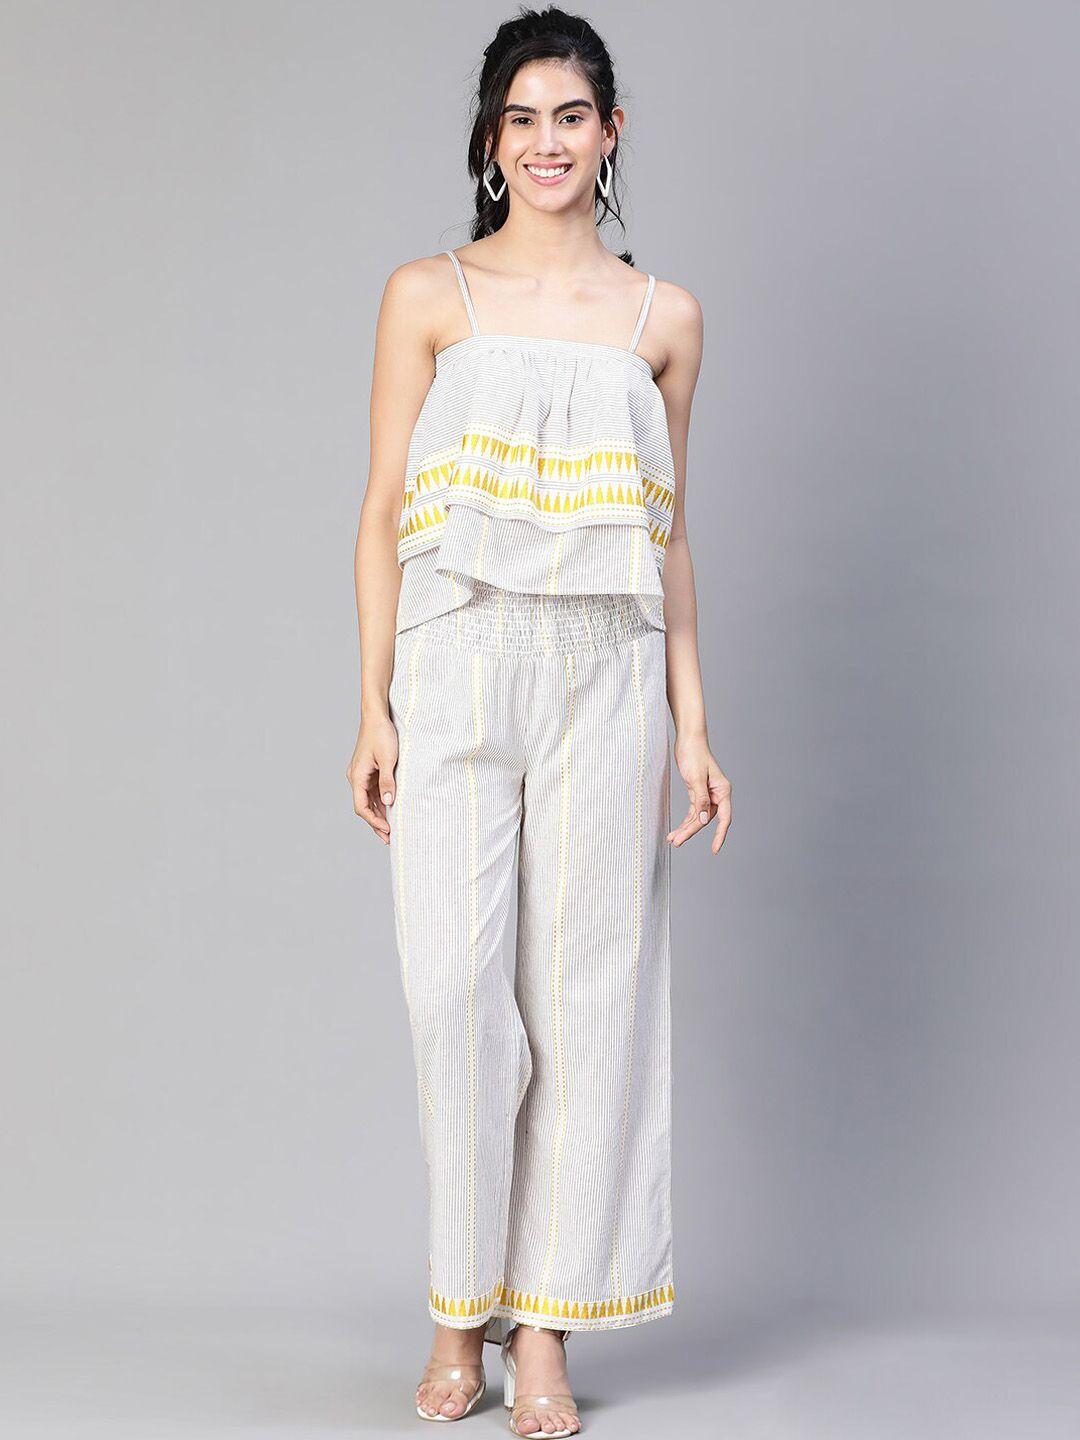 oxolloxo striped pure cotton shoulder straps top & trousers